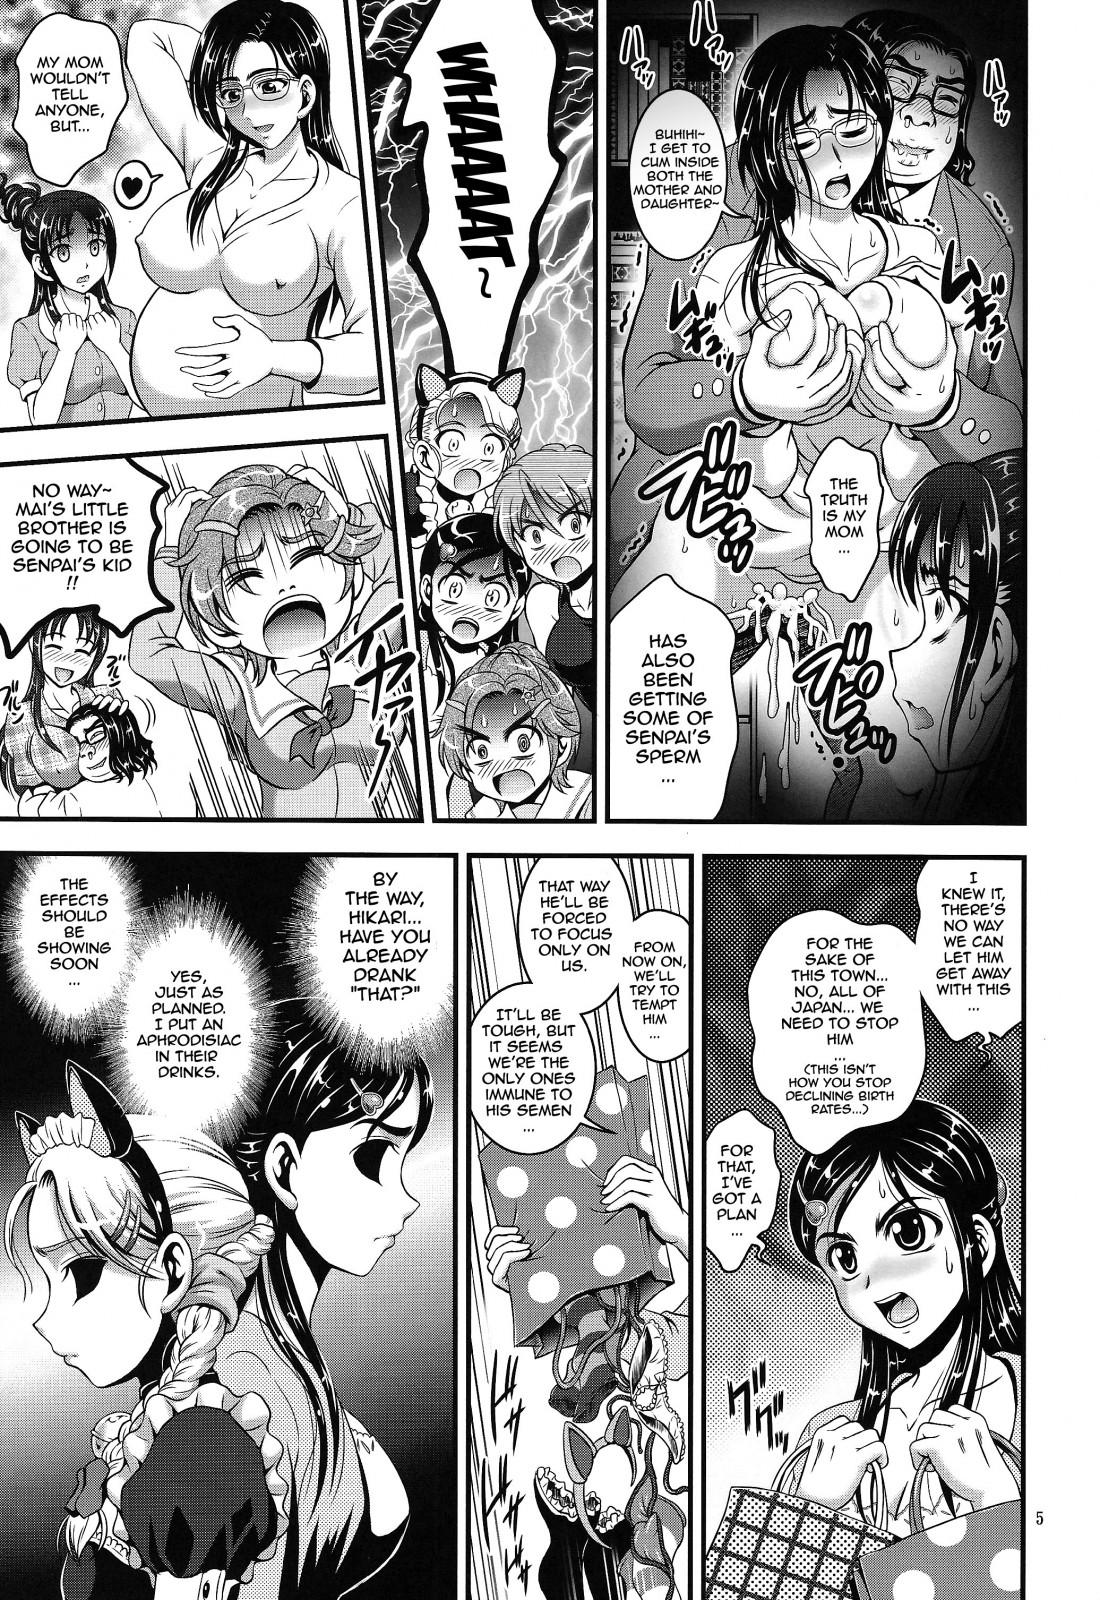 Colombia Ore Yome Ranking 1 | My Bride Ranking 1 - Pretty cure Tanned - Page 6